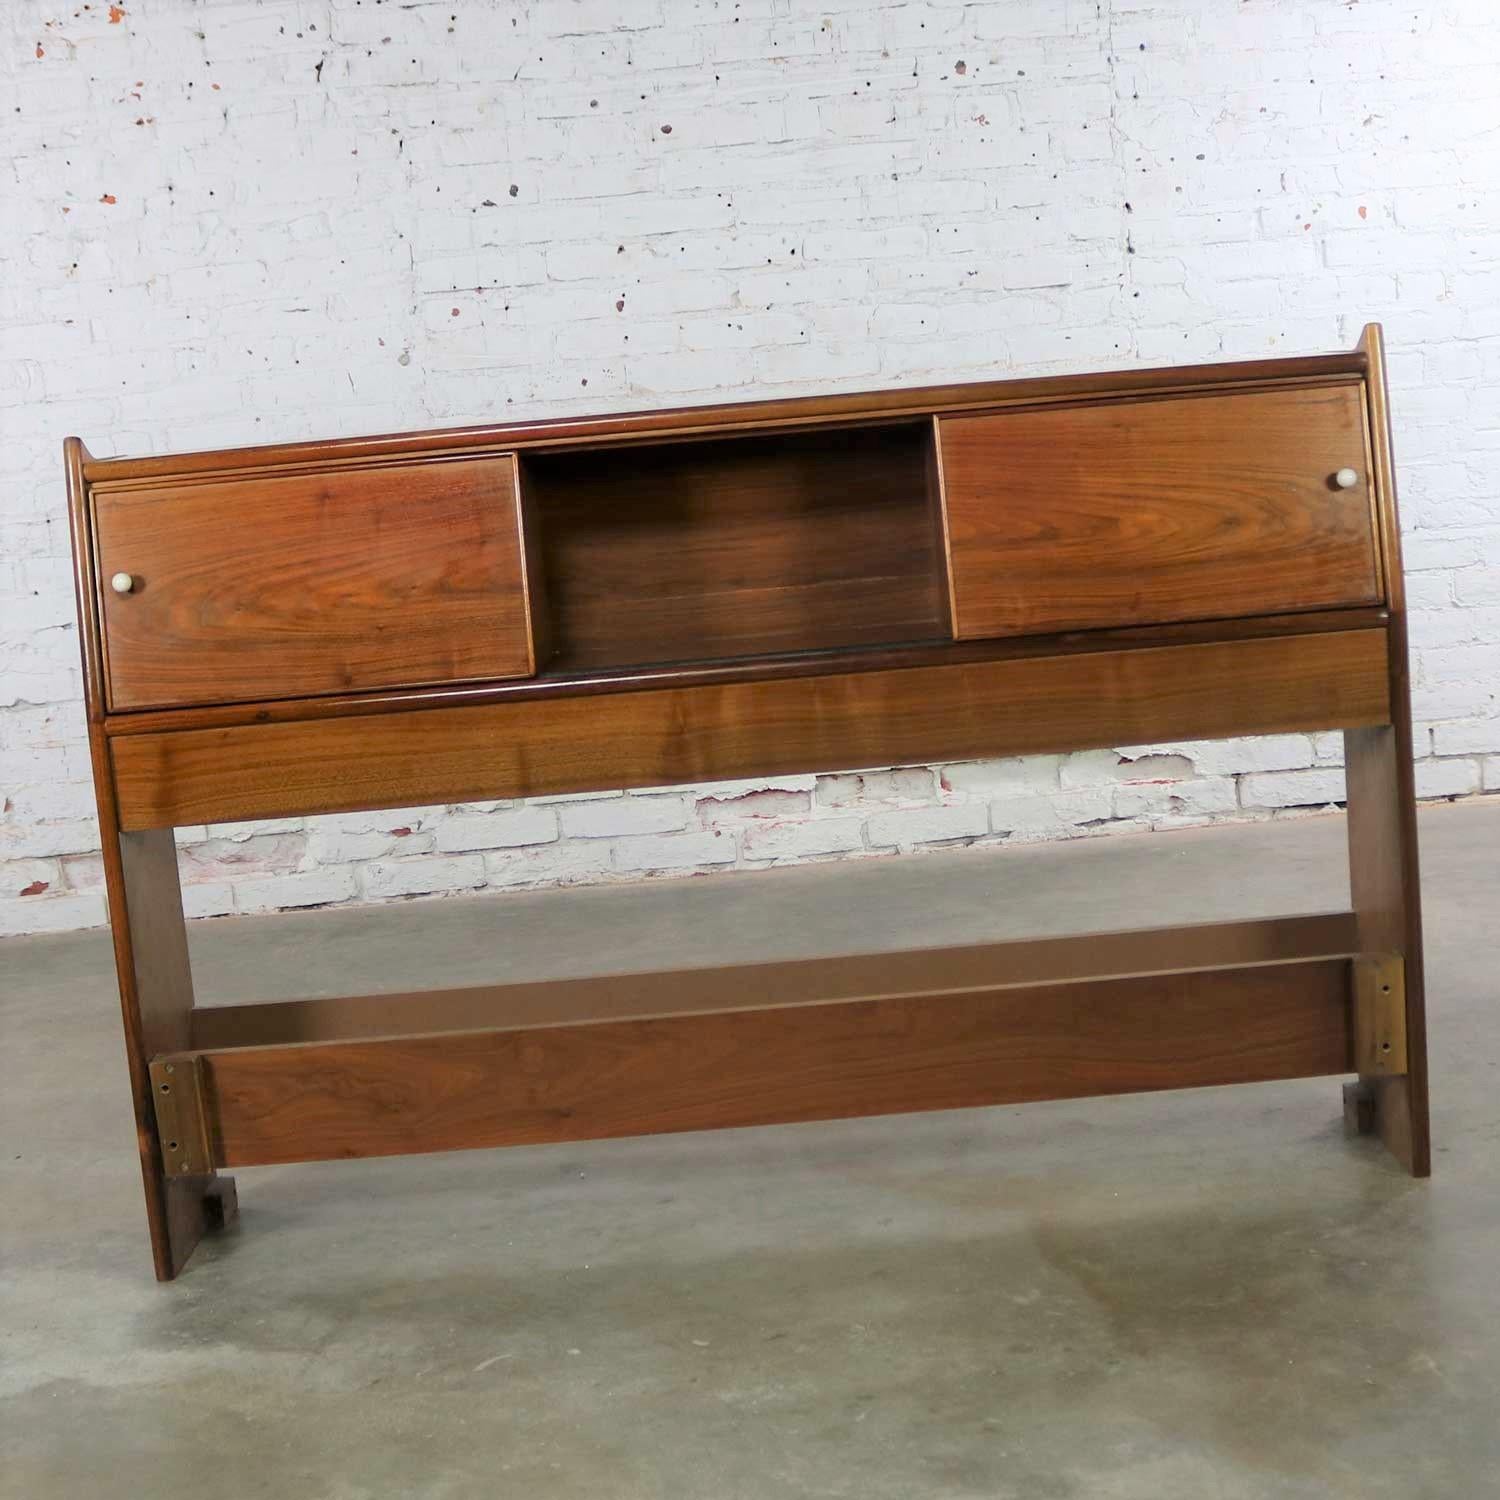 Handsome Mid-Century Modern walnut utility bookcase headboard with sliding cupboard doors 801-572-2 by Drexel from their Declaration collection designed by Kipp Stewart and Stewart MacDougall. It is in fabulous vintage condition overall. There is